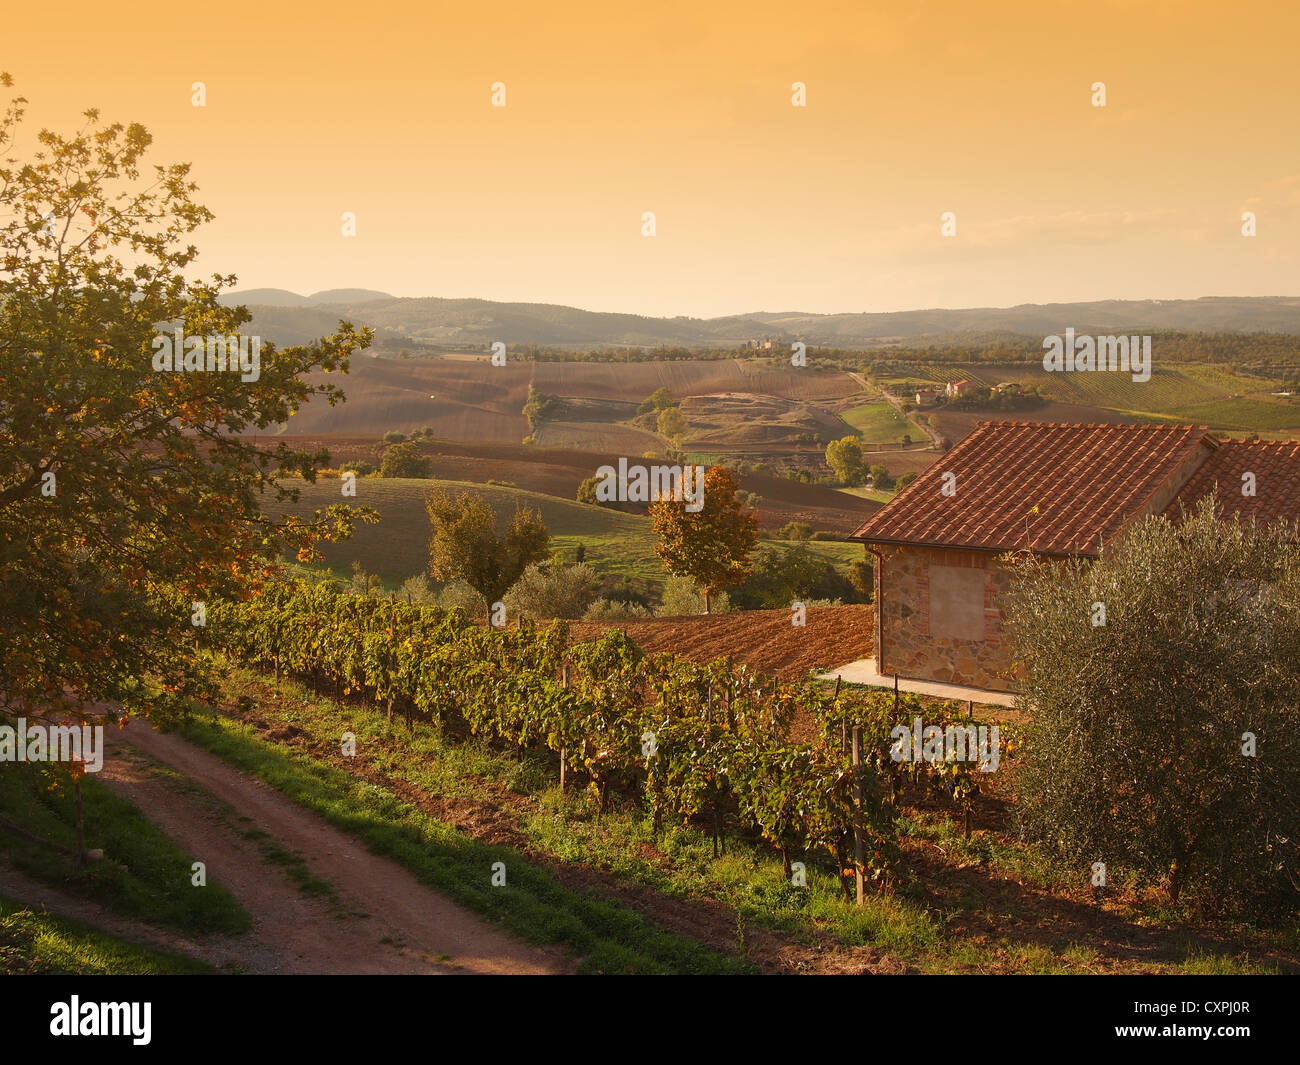 An autumn landscape with a vineyard and hills in the late fall sunlight in the Orcia Valley near Pienza in Tuscany, Italy. Stock Photo